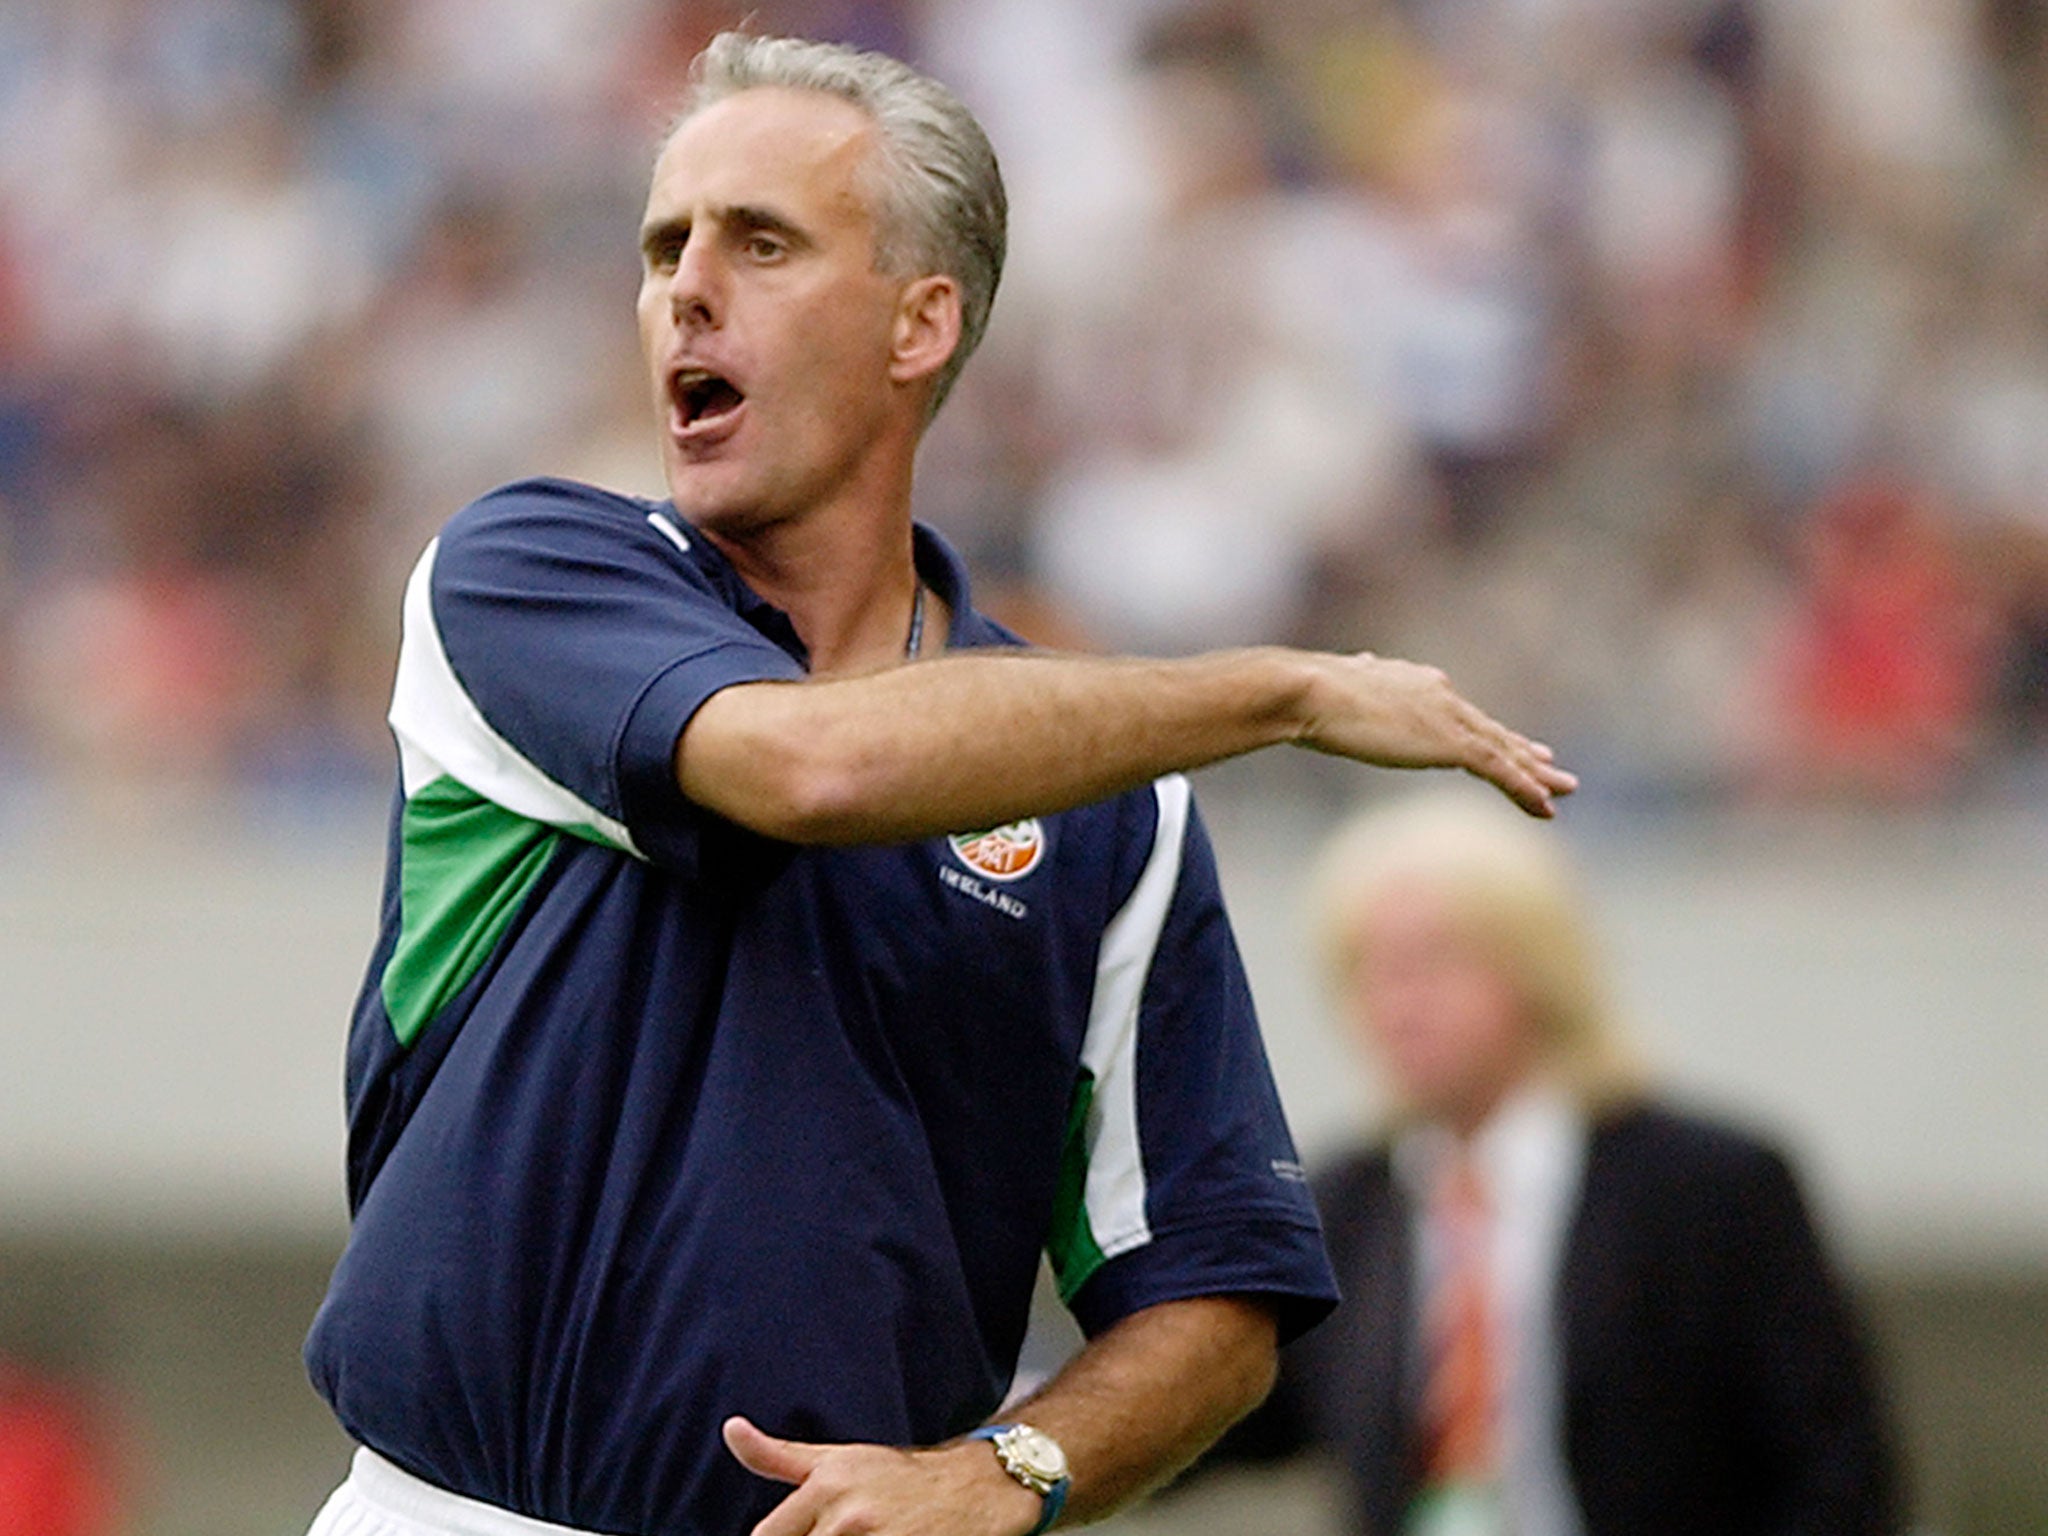 Mick McCarthy guided the Republic of Ireland to the 2002 World Cup finals